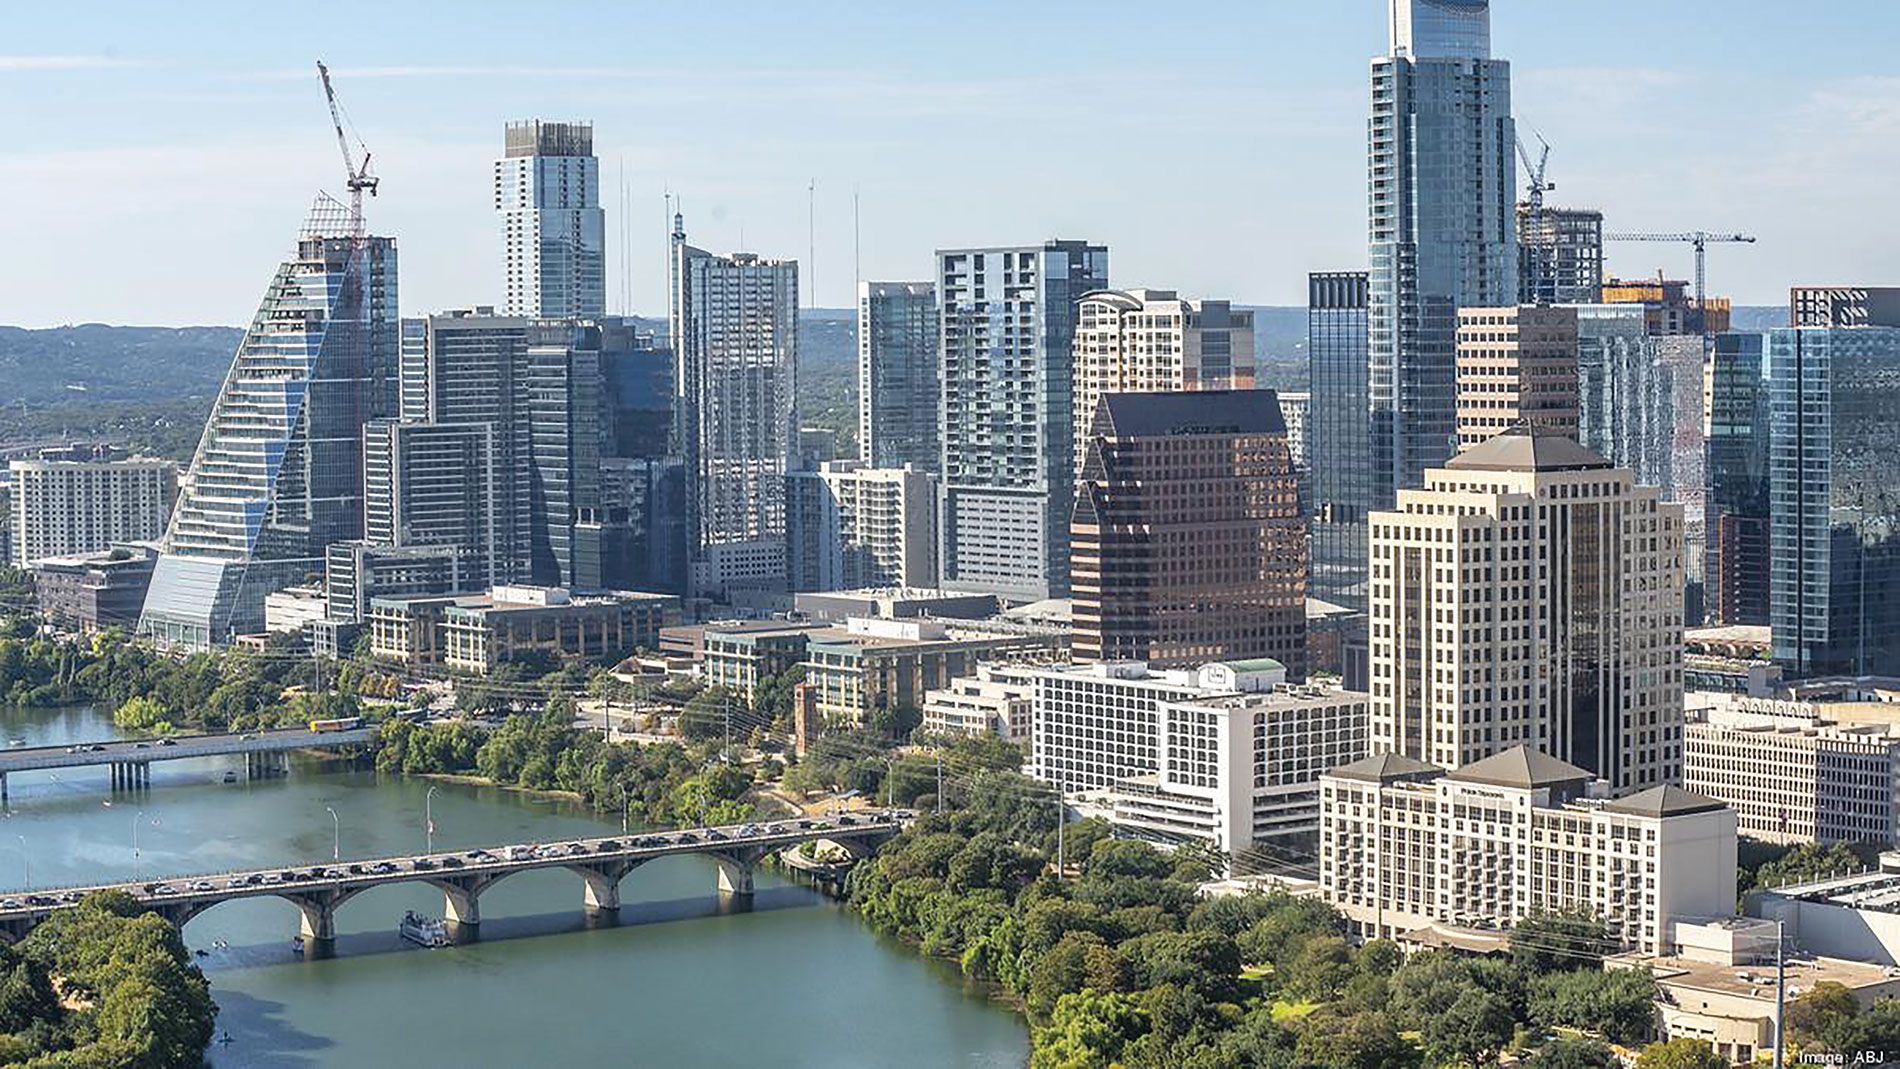 Austin skyline by a river. Image by IBI Group, Inc.